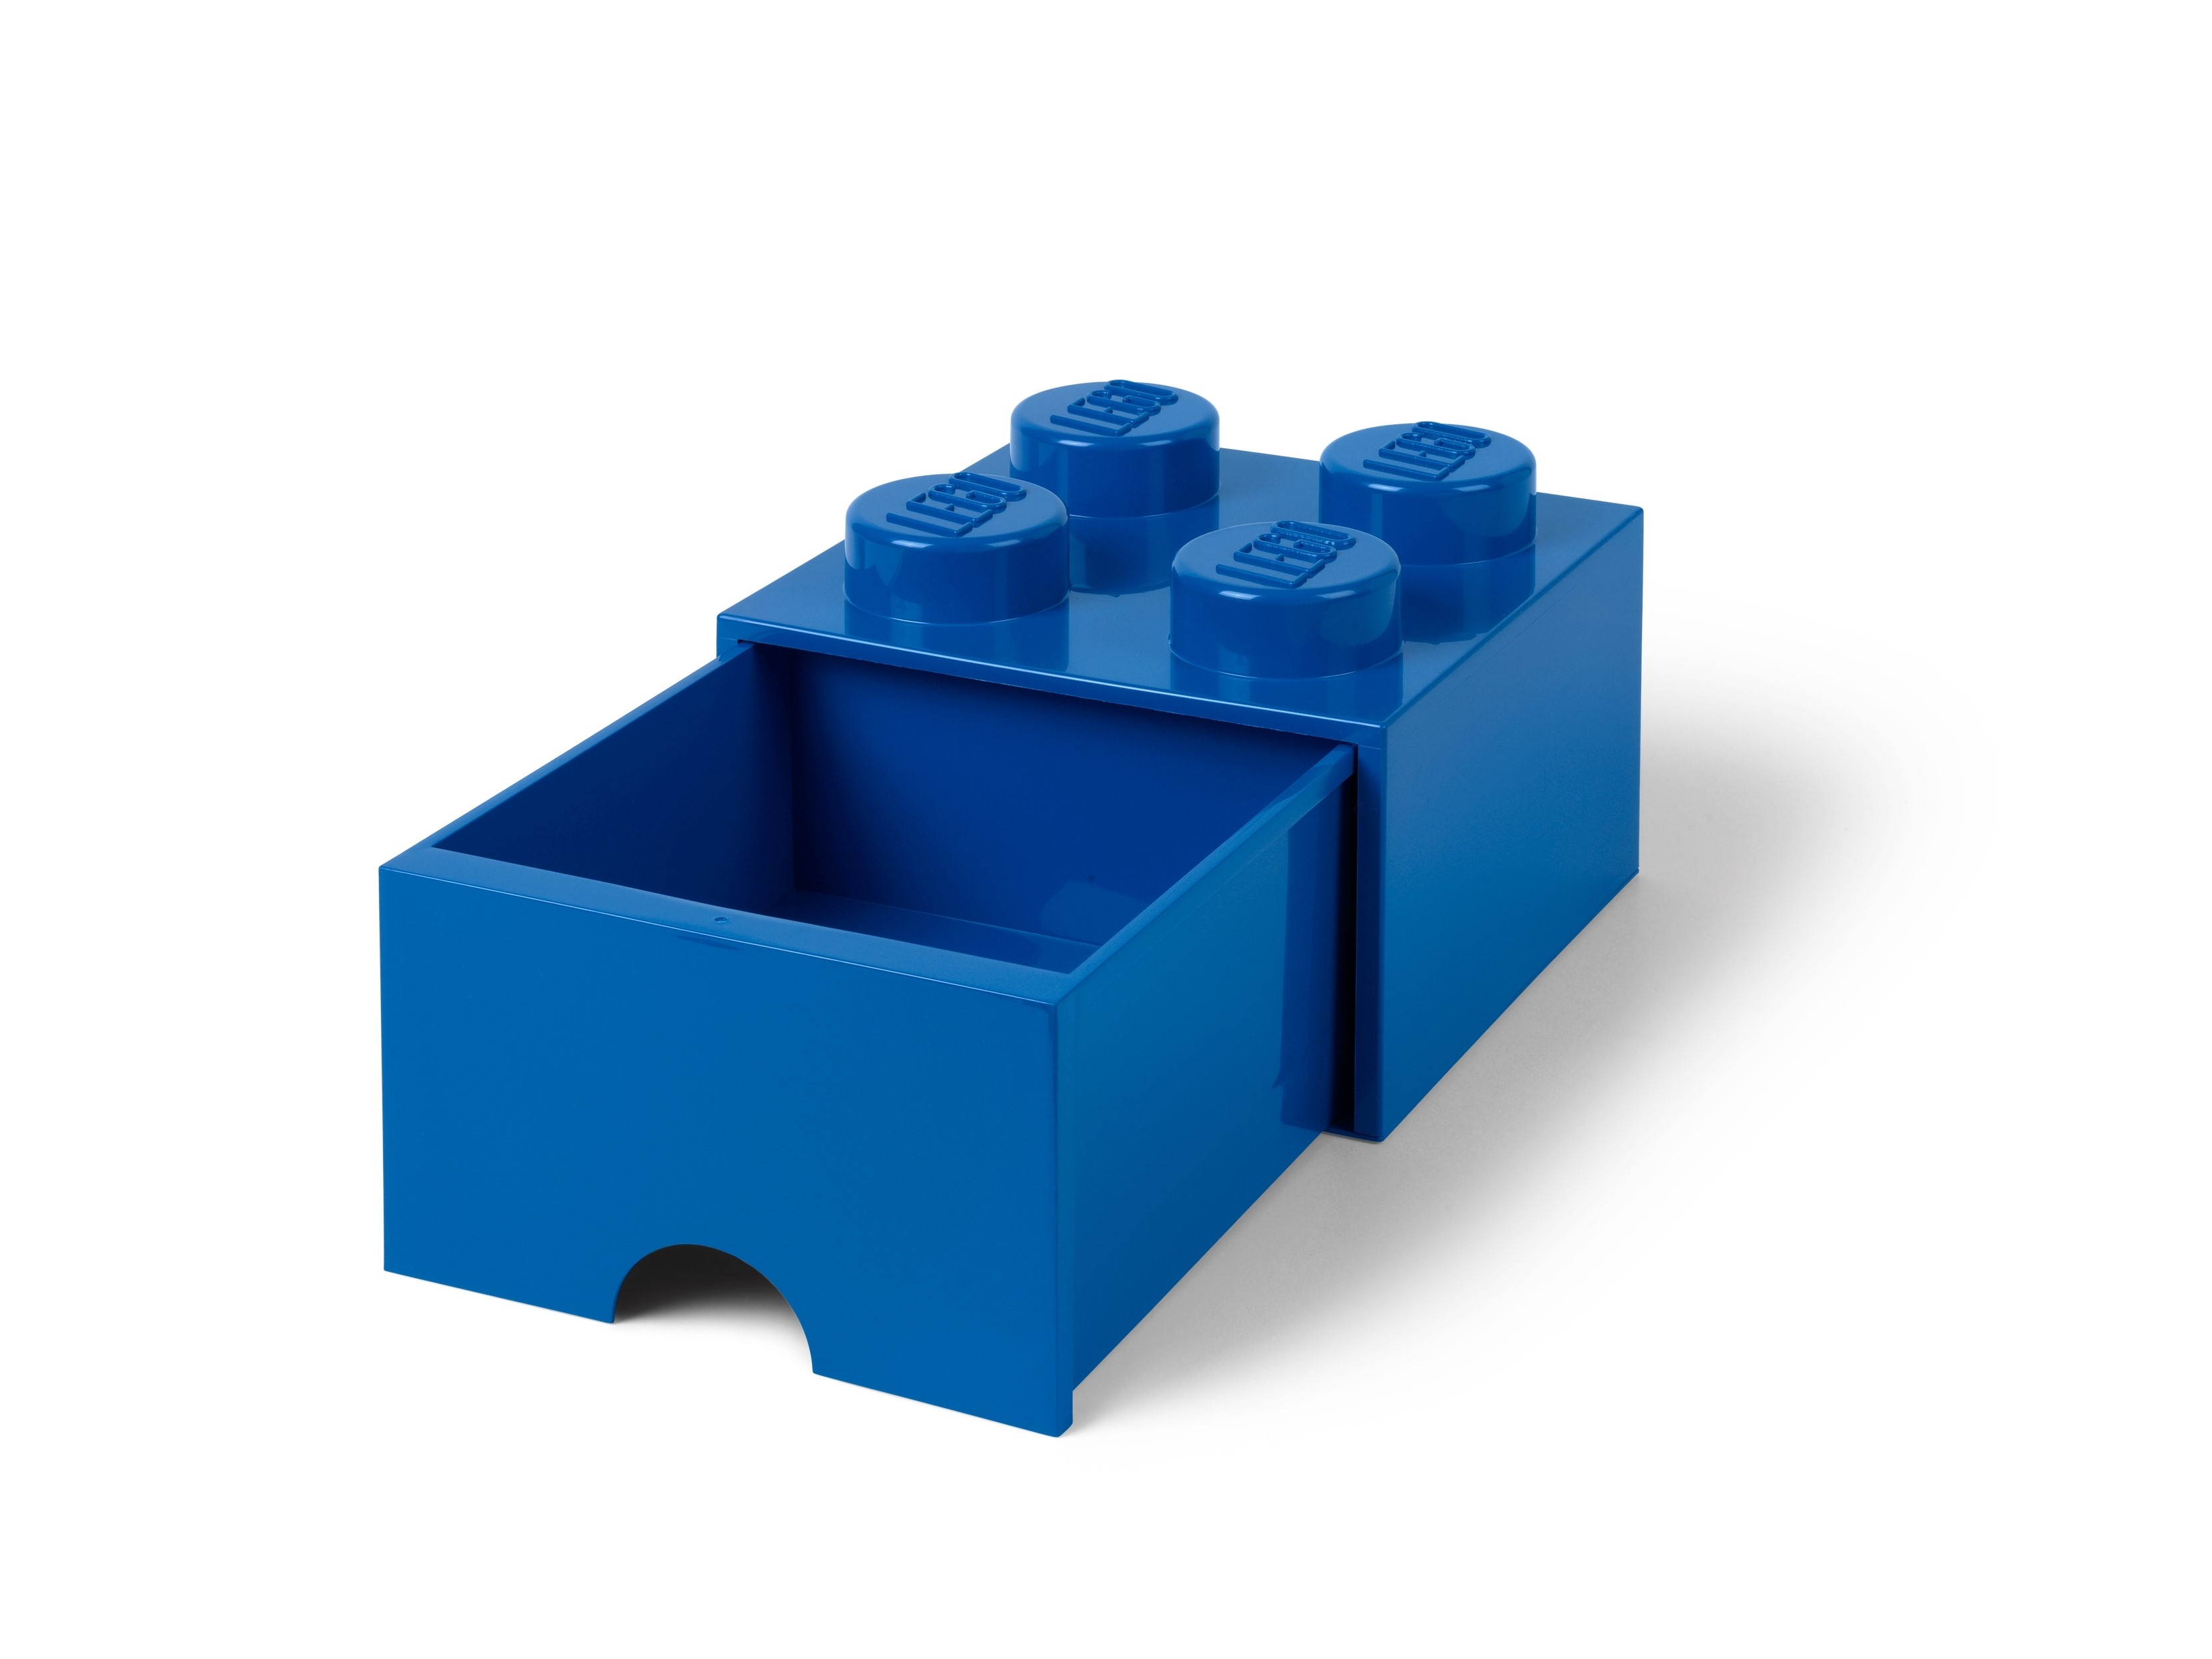 drawers for lego